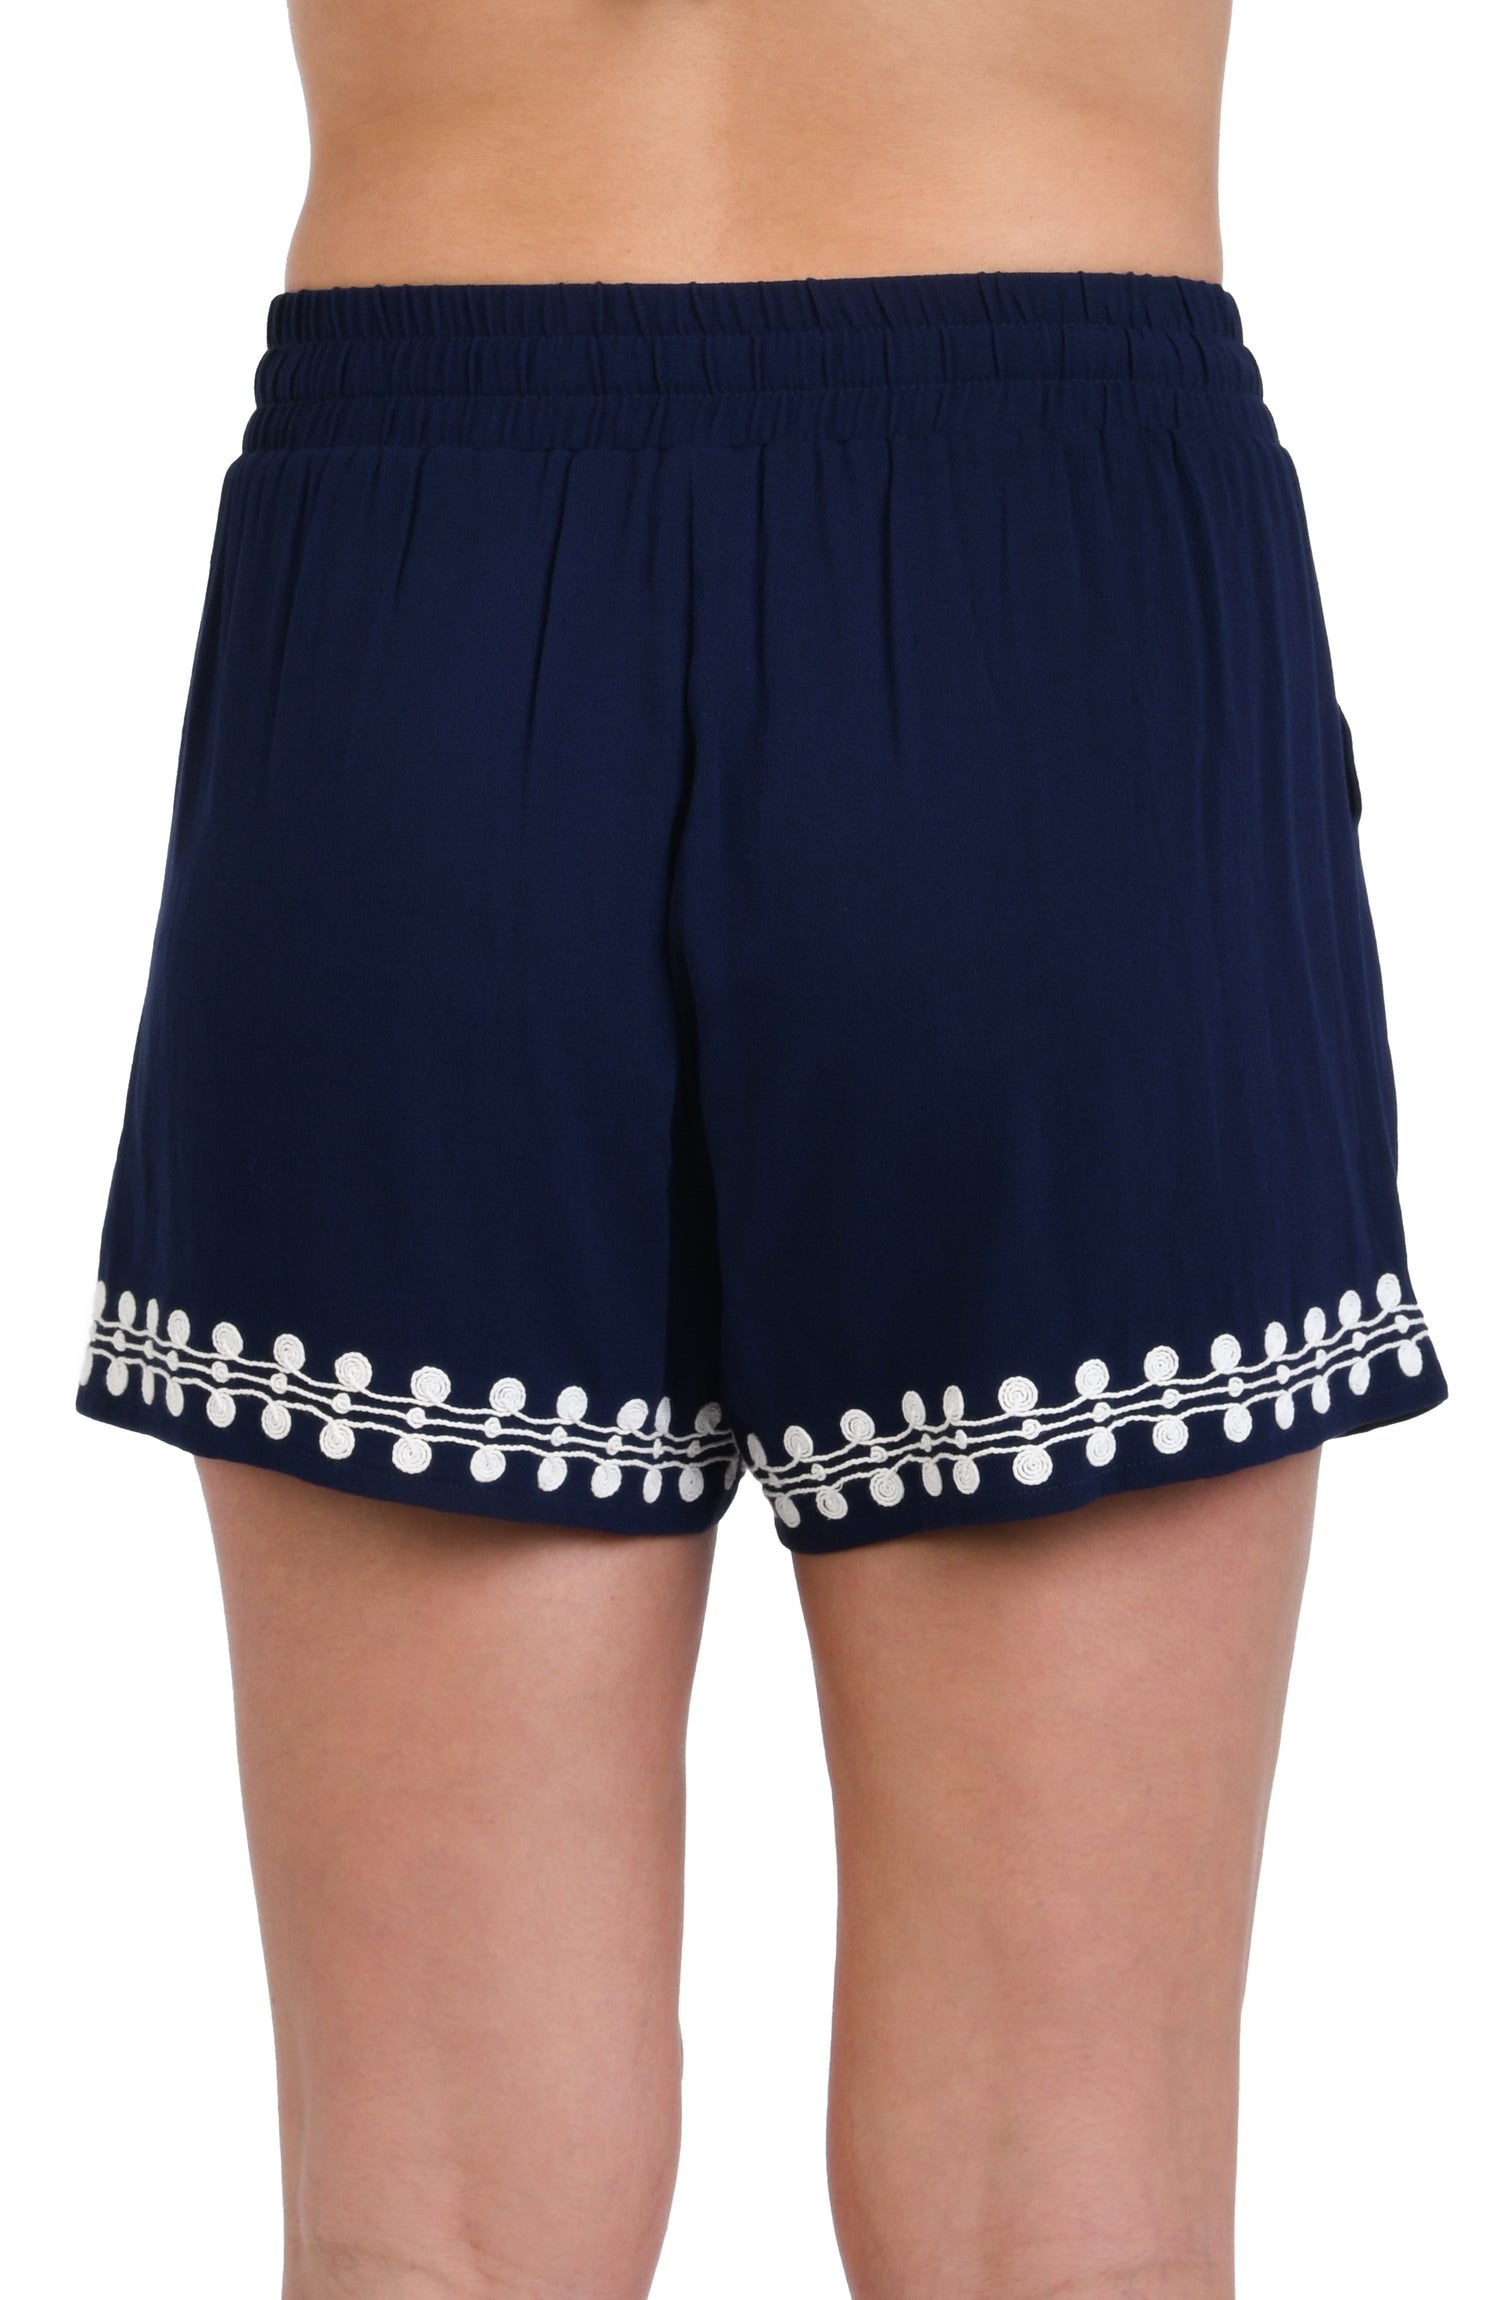 Model is wearing an indigo and white patterned beach shorts that resembles a string of white sea scallop shells.